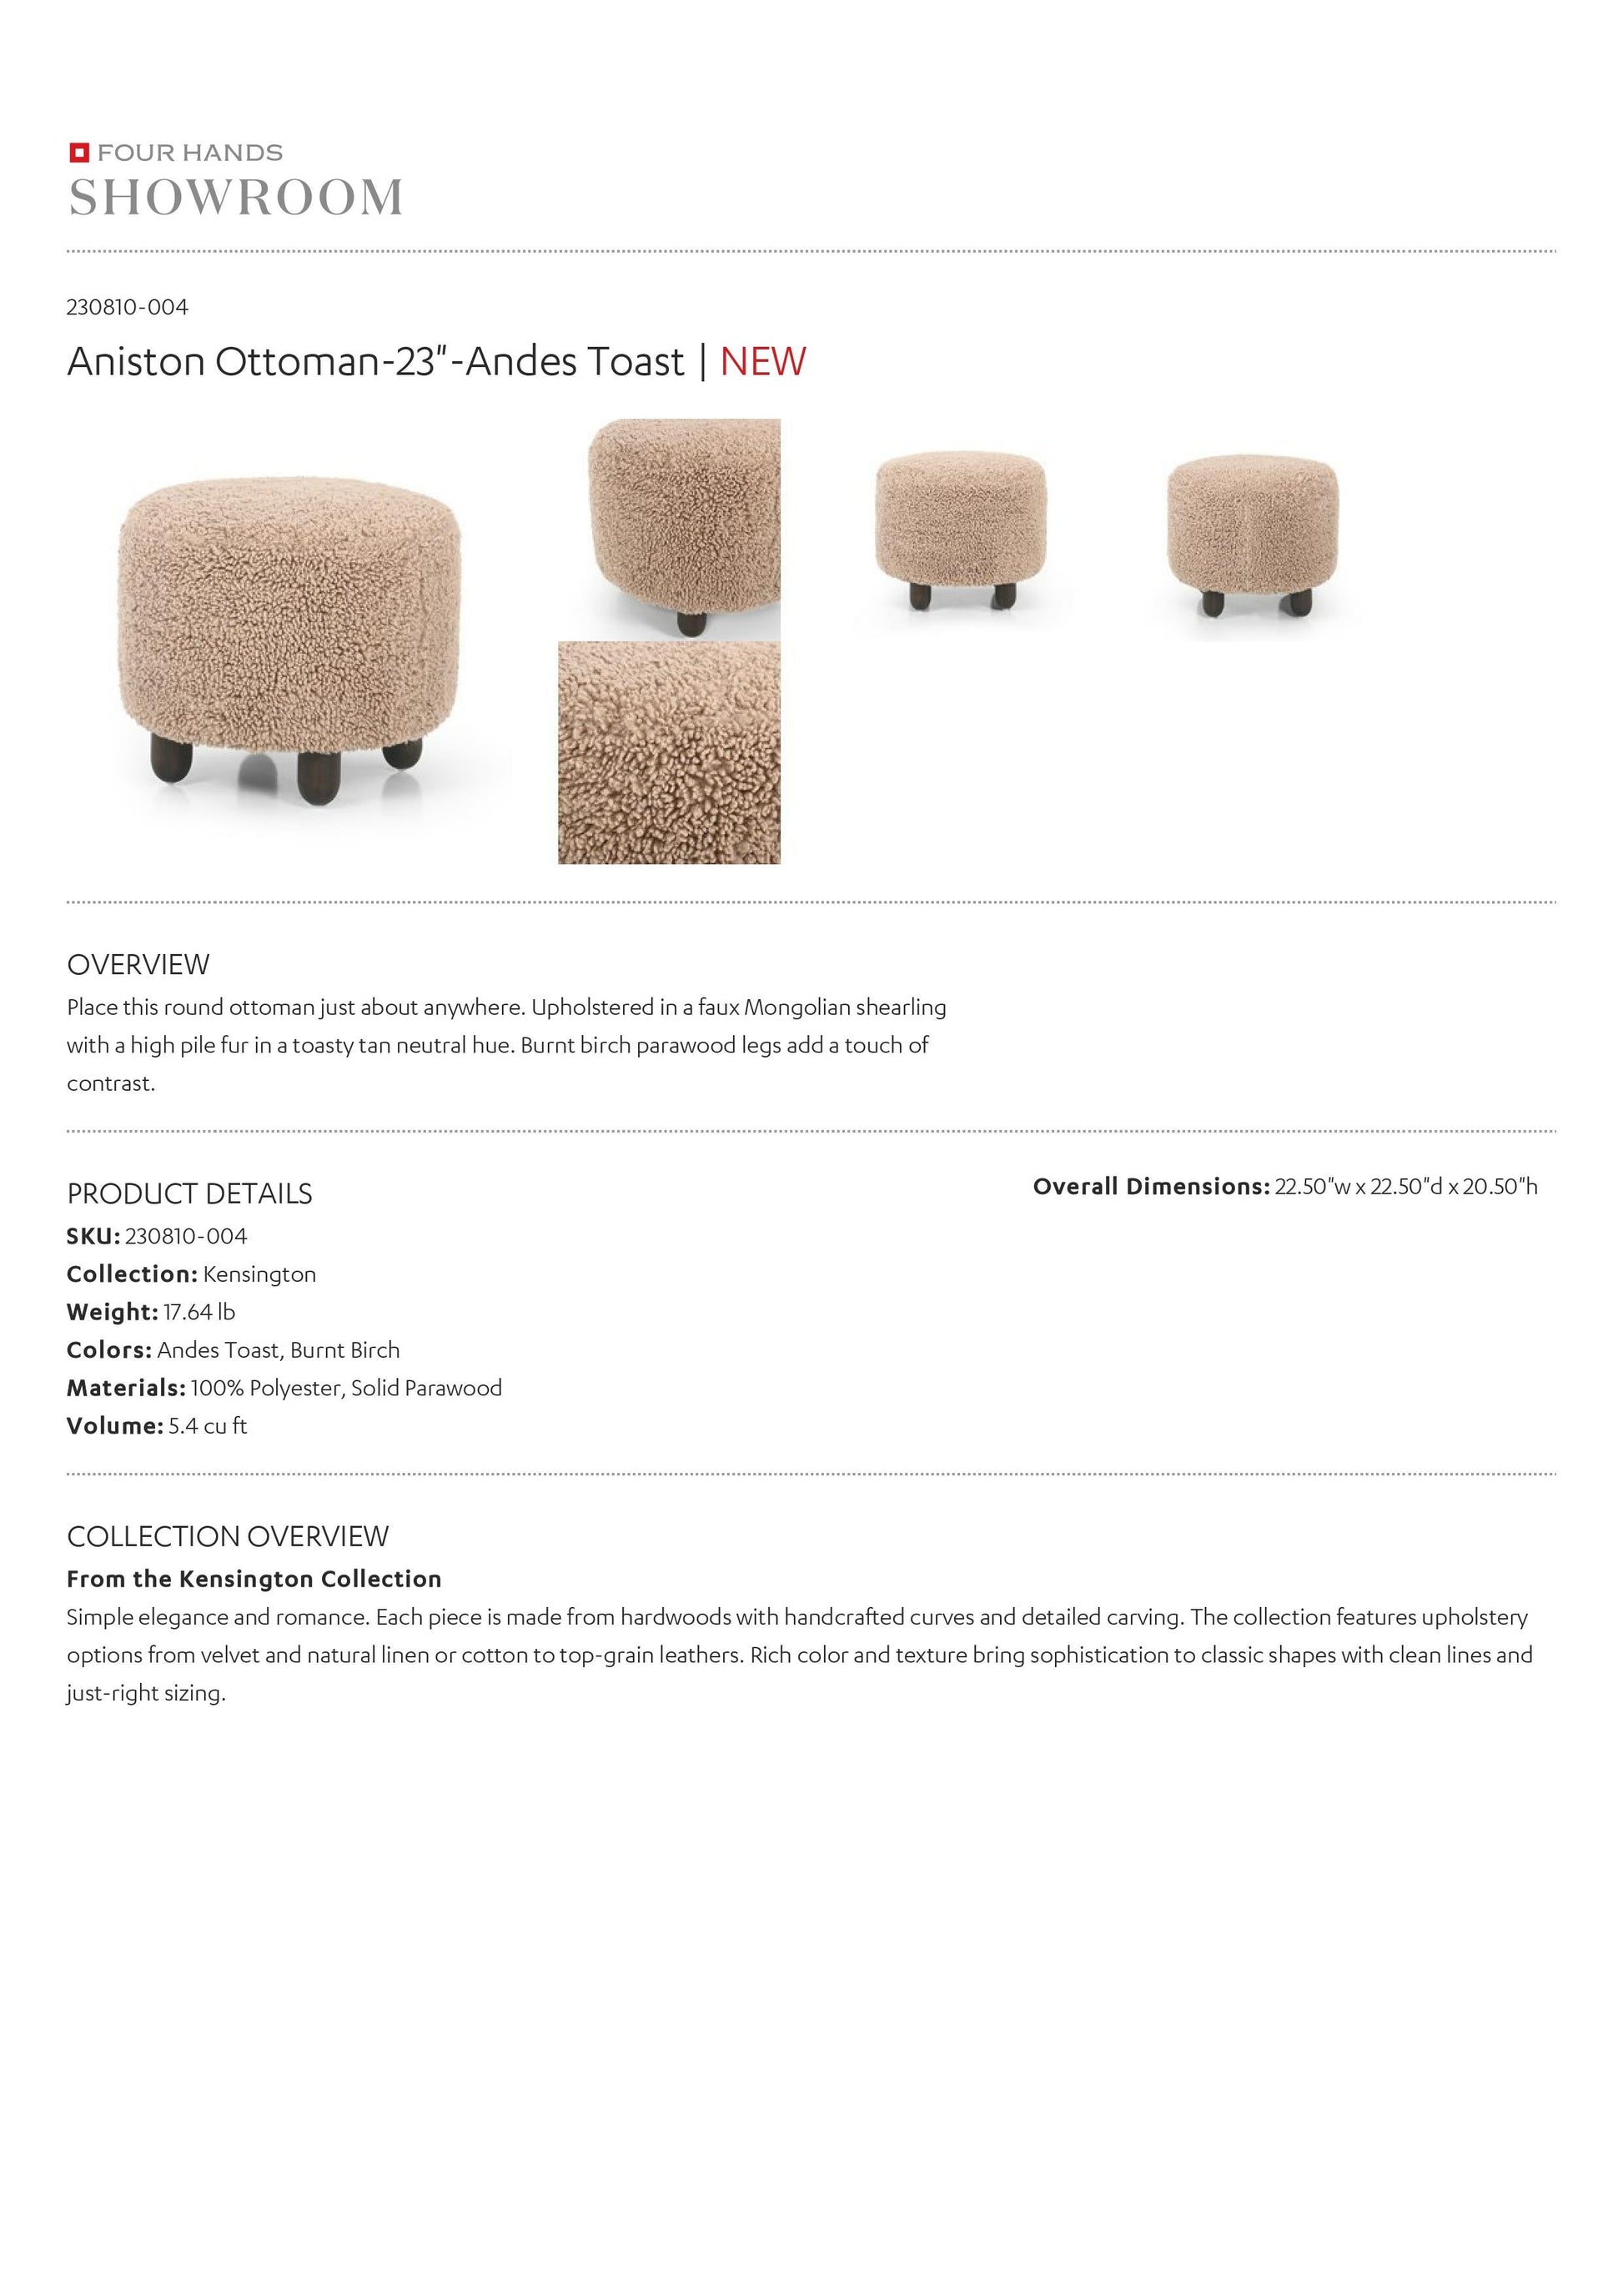 four hands aniston ottoman andes toast tearsheet